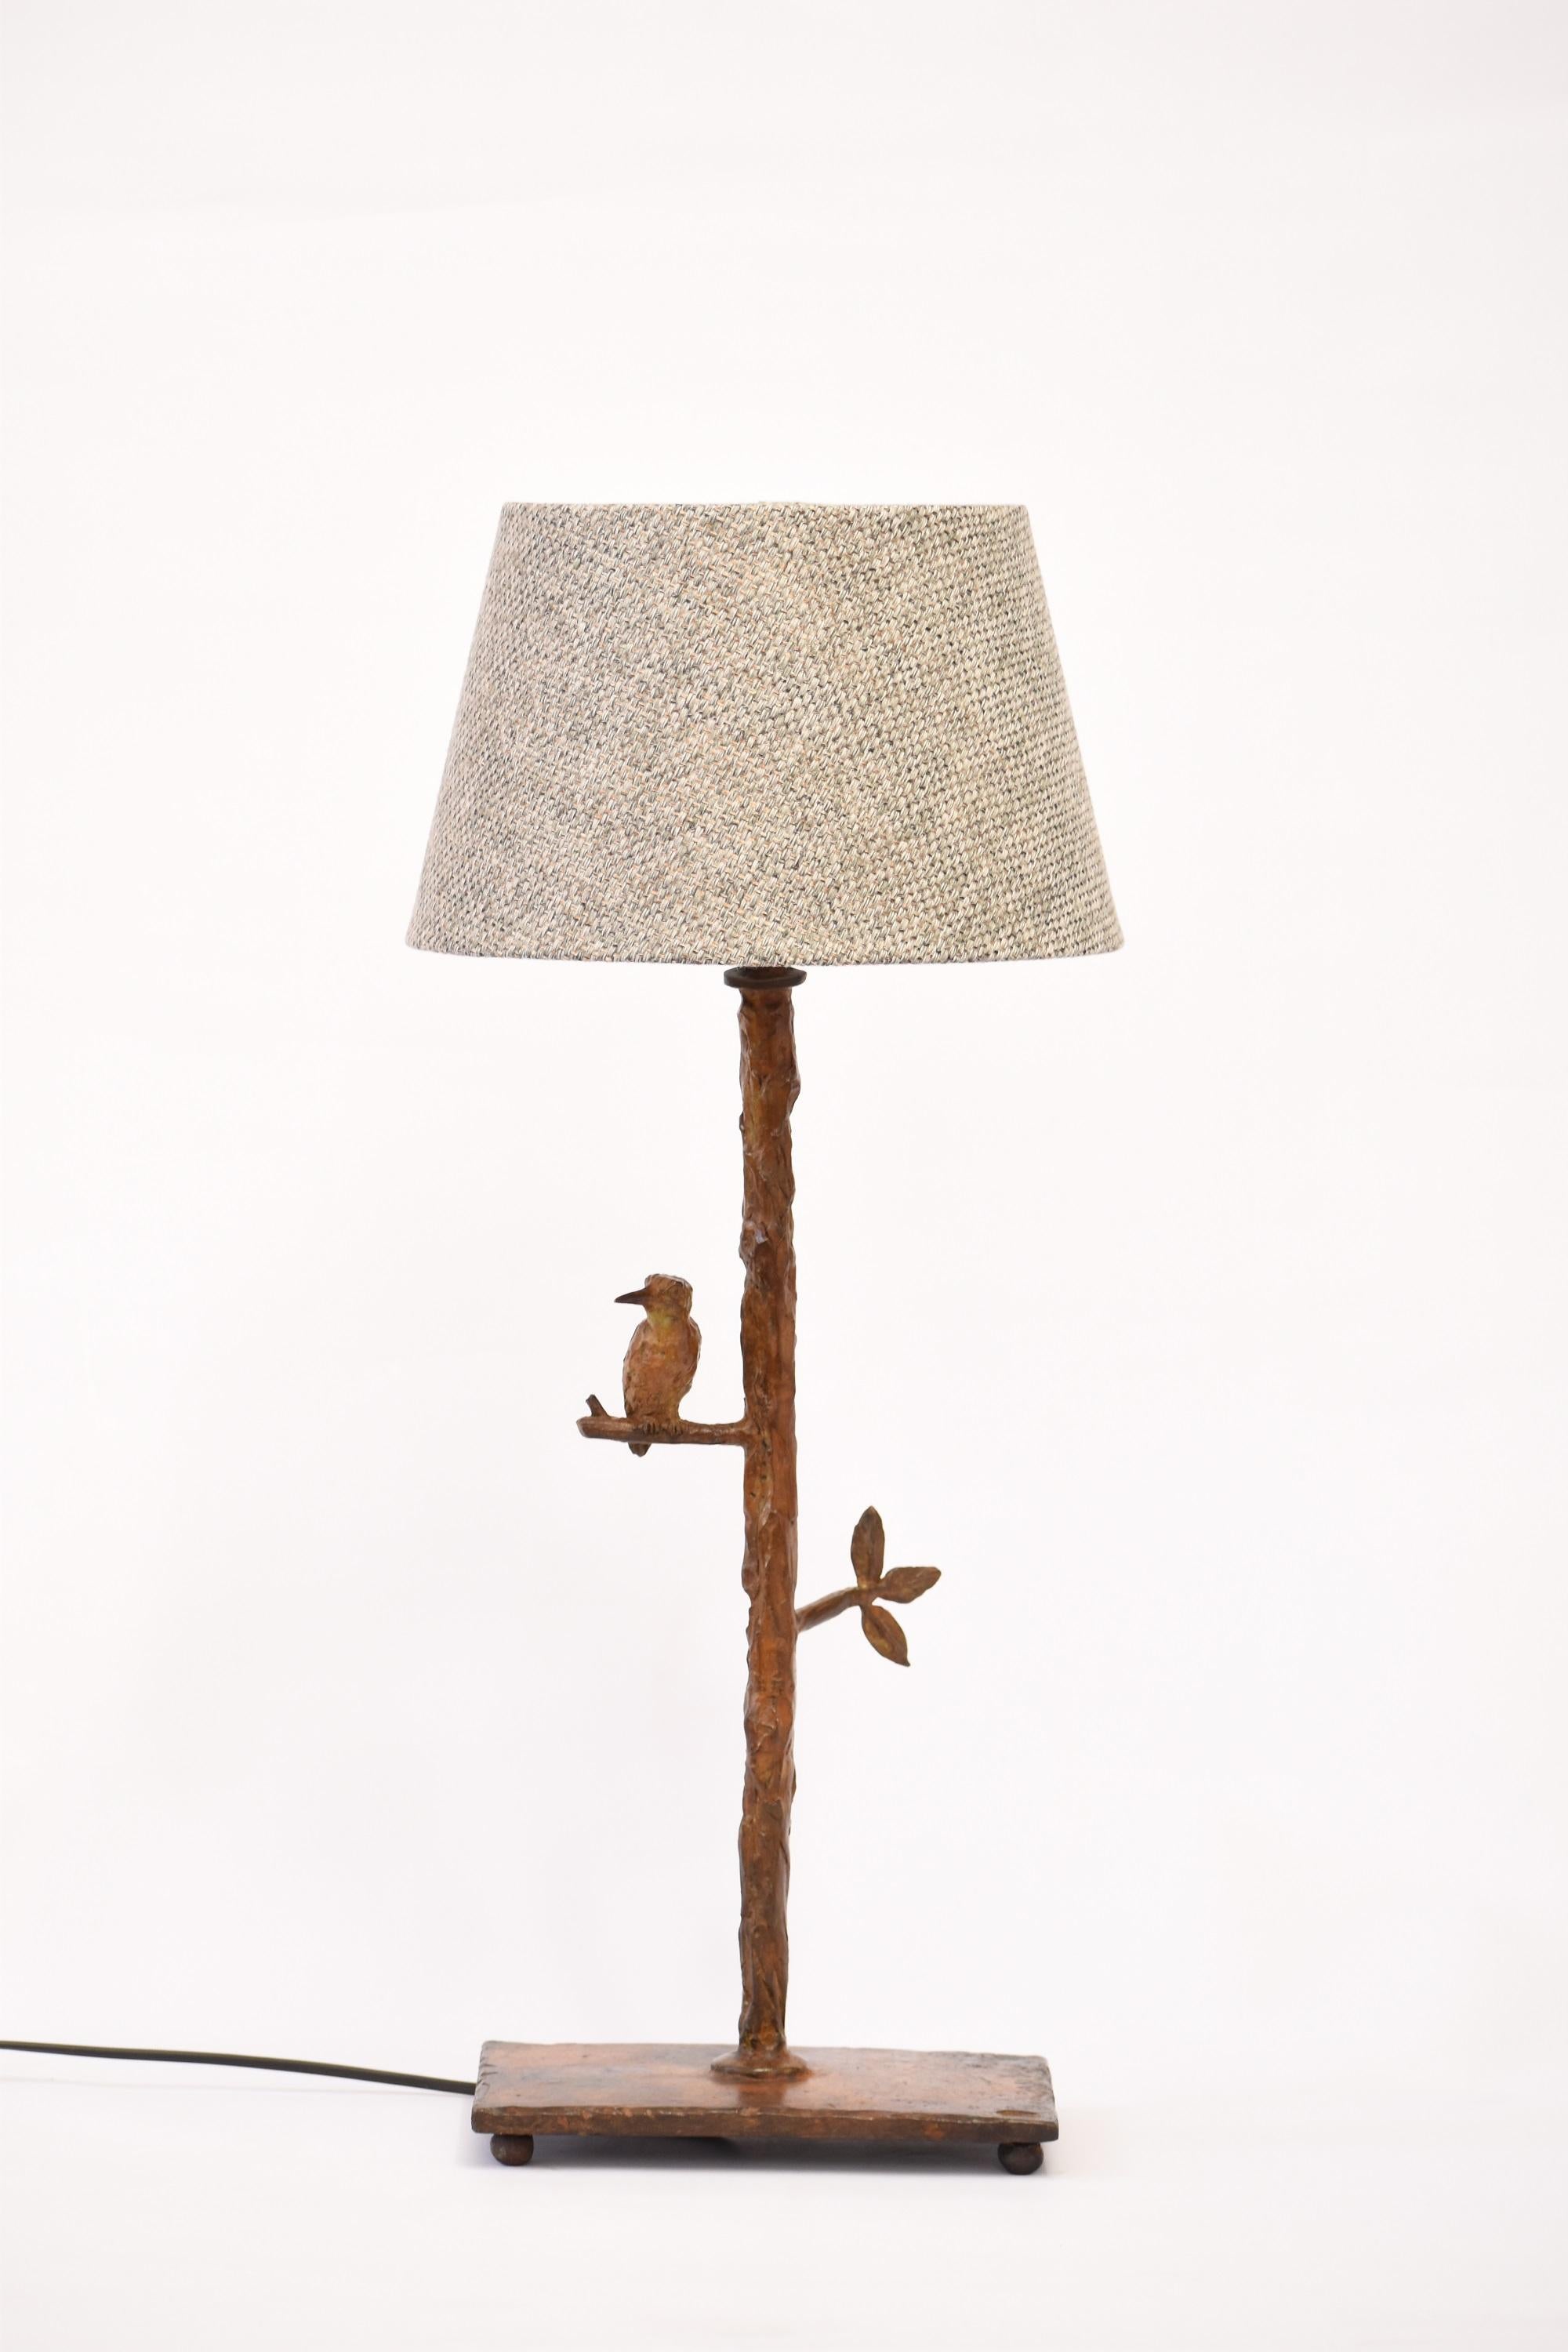 Handcrafted Sculptural Kingfisher Table Lamp in cast bronze using the lost wax method. Handmade - sculpted, molded, cast and finished individually by hand making each piece one of a kind.  Features a Kingfisher in cast bronze.

Height 52 cm